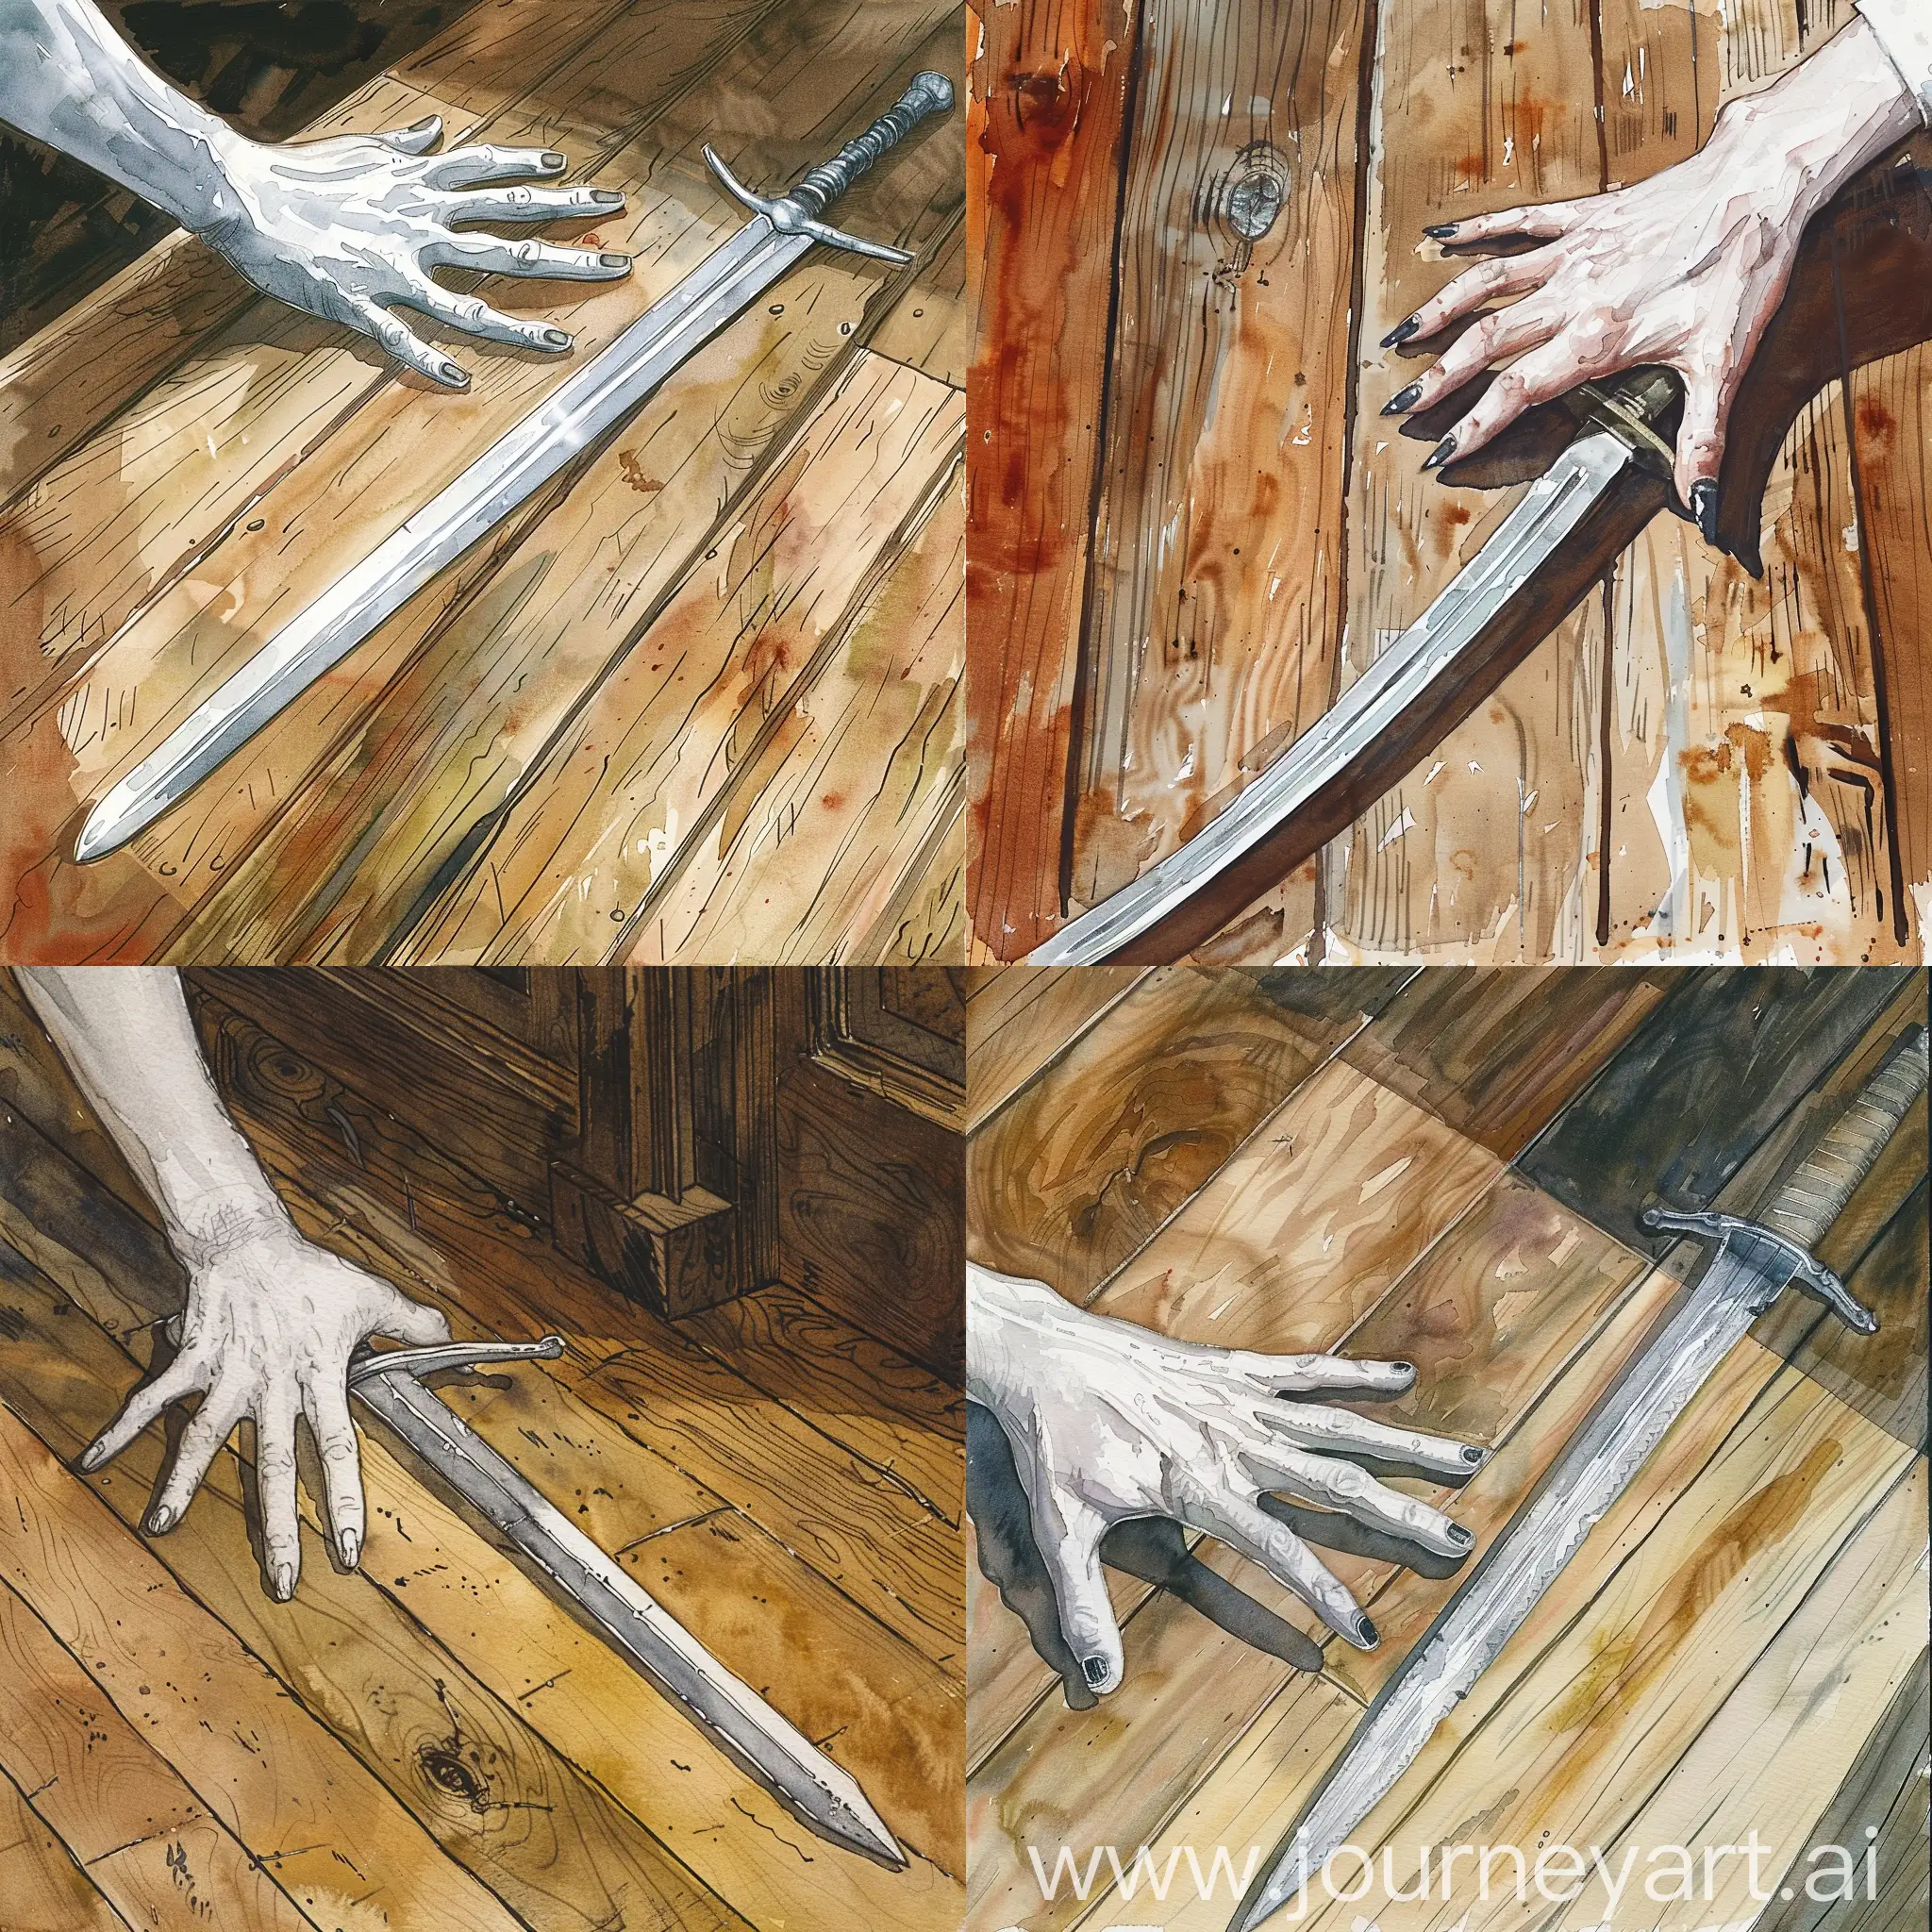 Mystical-Silver-Sword-Resting-by-Mysterious-Pale-Hand-in-Watercolor